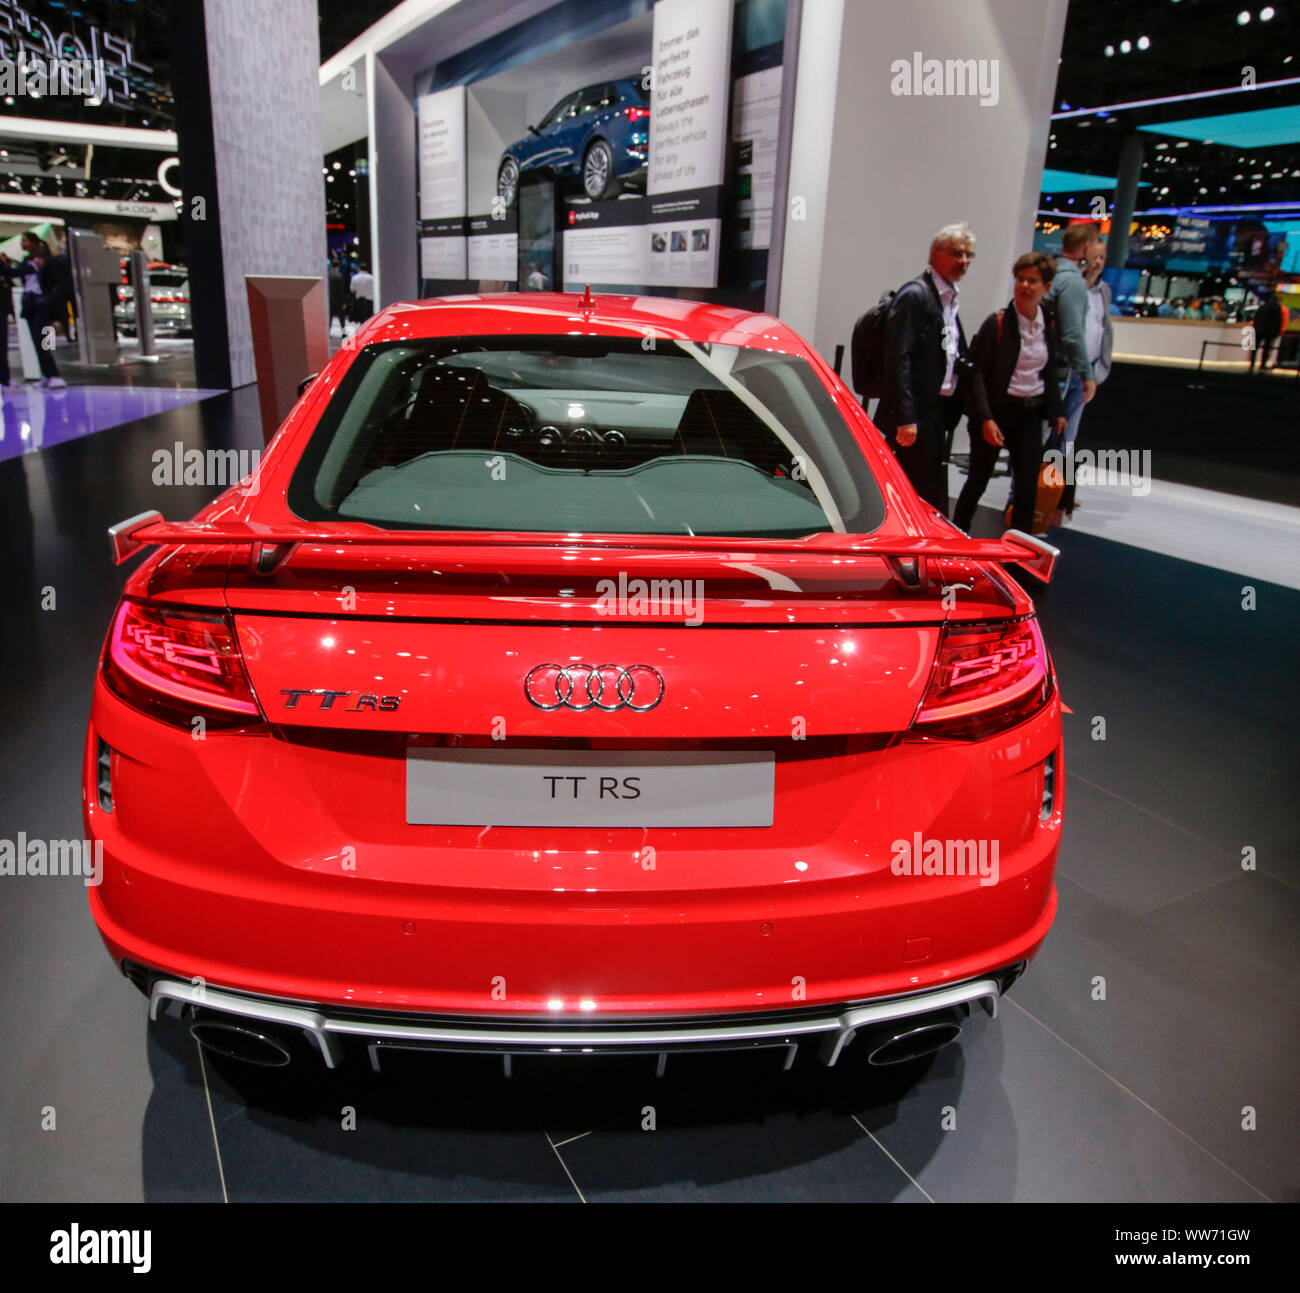 Frankfurt, Germany. 12th Sep, 2019. The German car manufacturer Audi, part of the Volkswagen Group, displays the Audi TT RS at the 2019 Internationale Automobil-Ausstellung (IAA). (Photo by Michael Debets/Pacific Press) Credit: Pacific Press Agency/Alamy Live News Stock Photo